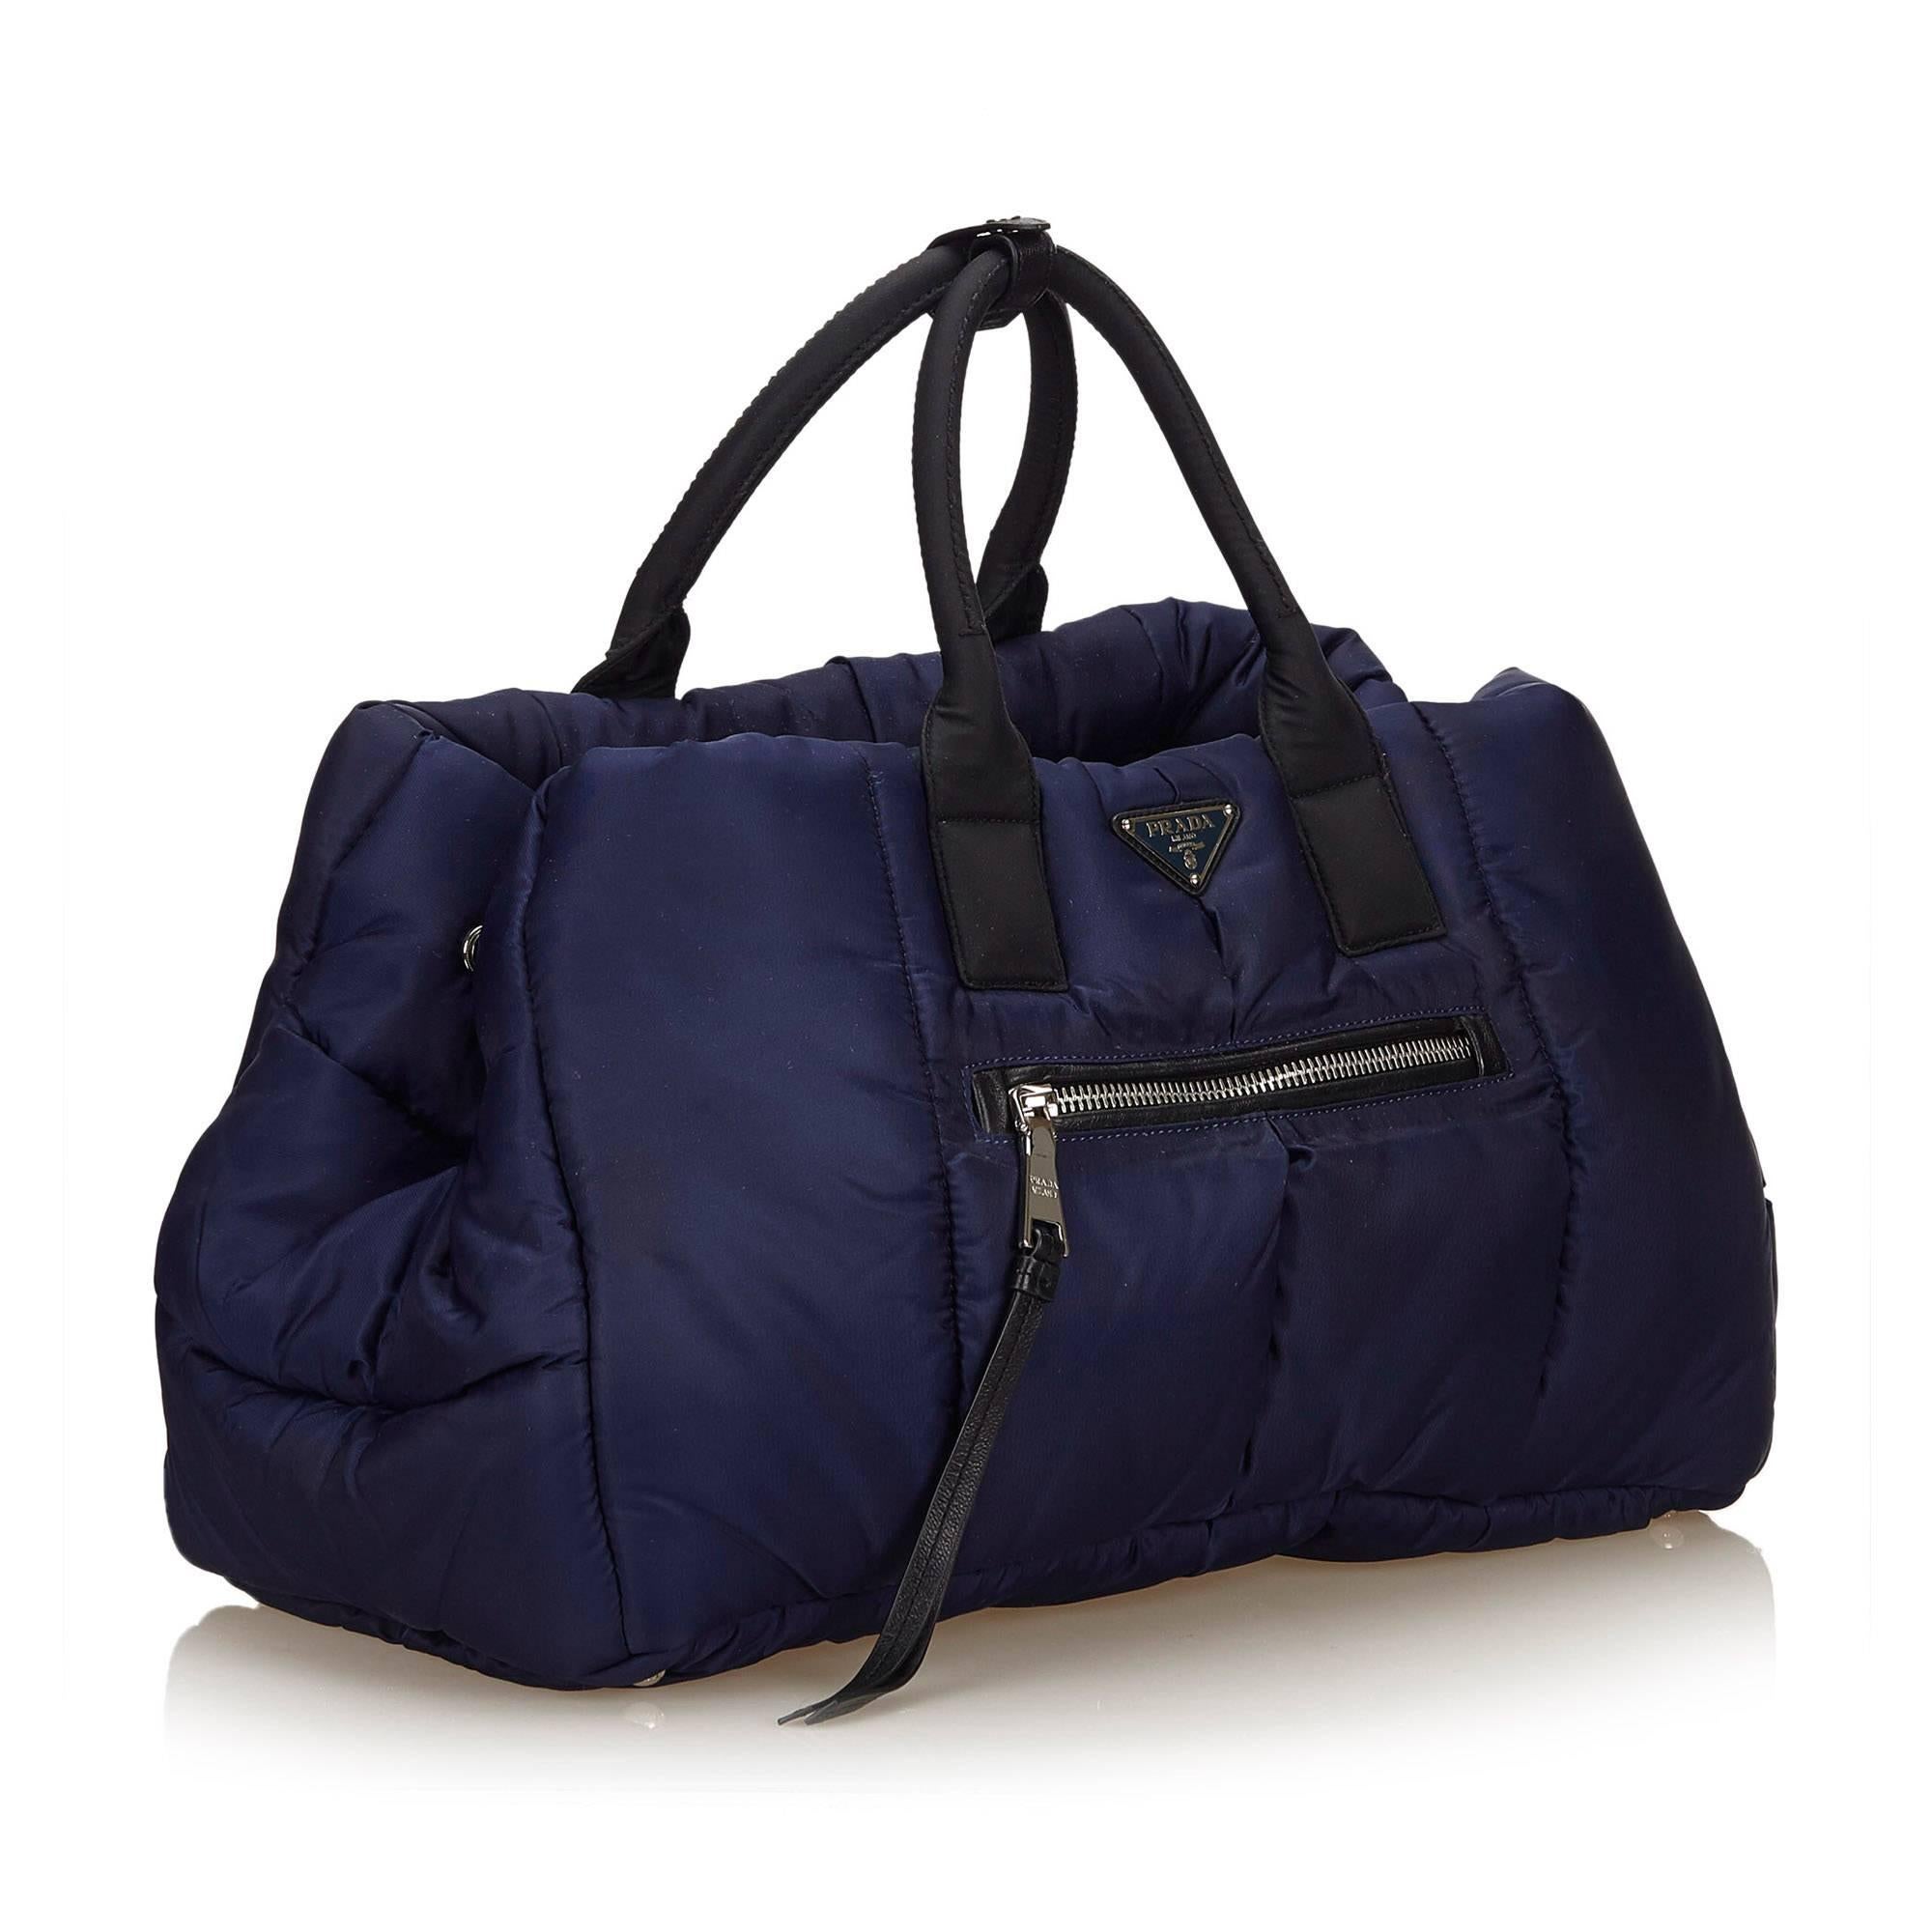 This handbag features a nylon body, exterior front and back zip pockets, rolled handle, open top, and interior pockets. 

It carries a B condition rating.

Dimensions: 
Length 27 cm
Width 43 cm
Depth 20 cm
Hand Drop 15 cm

Inclusions: Shoulder